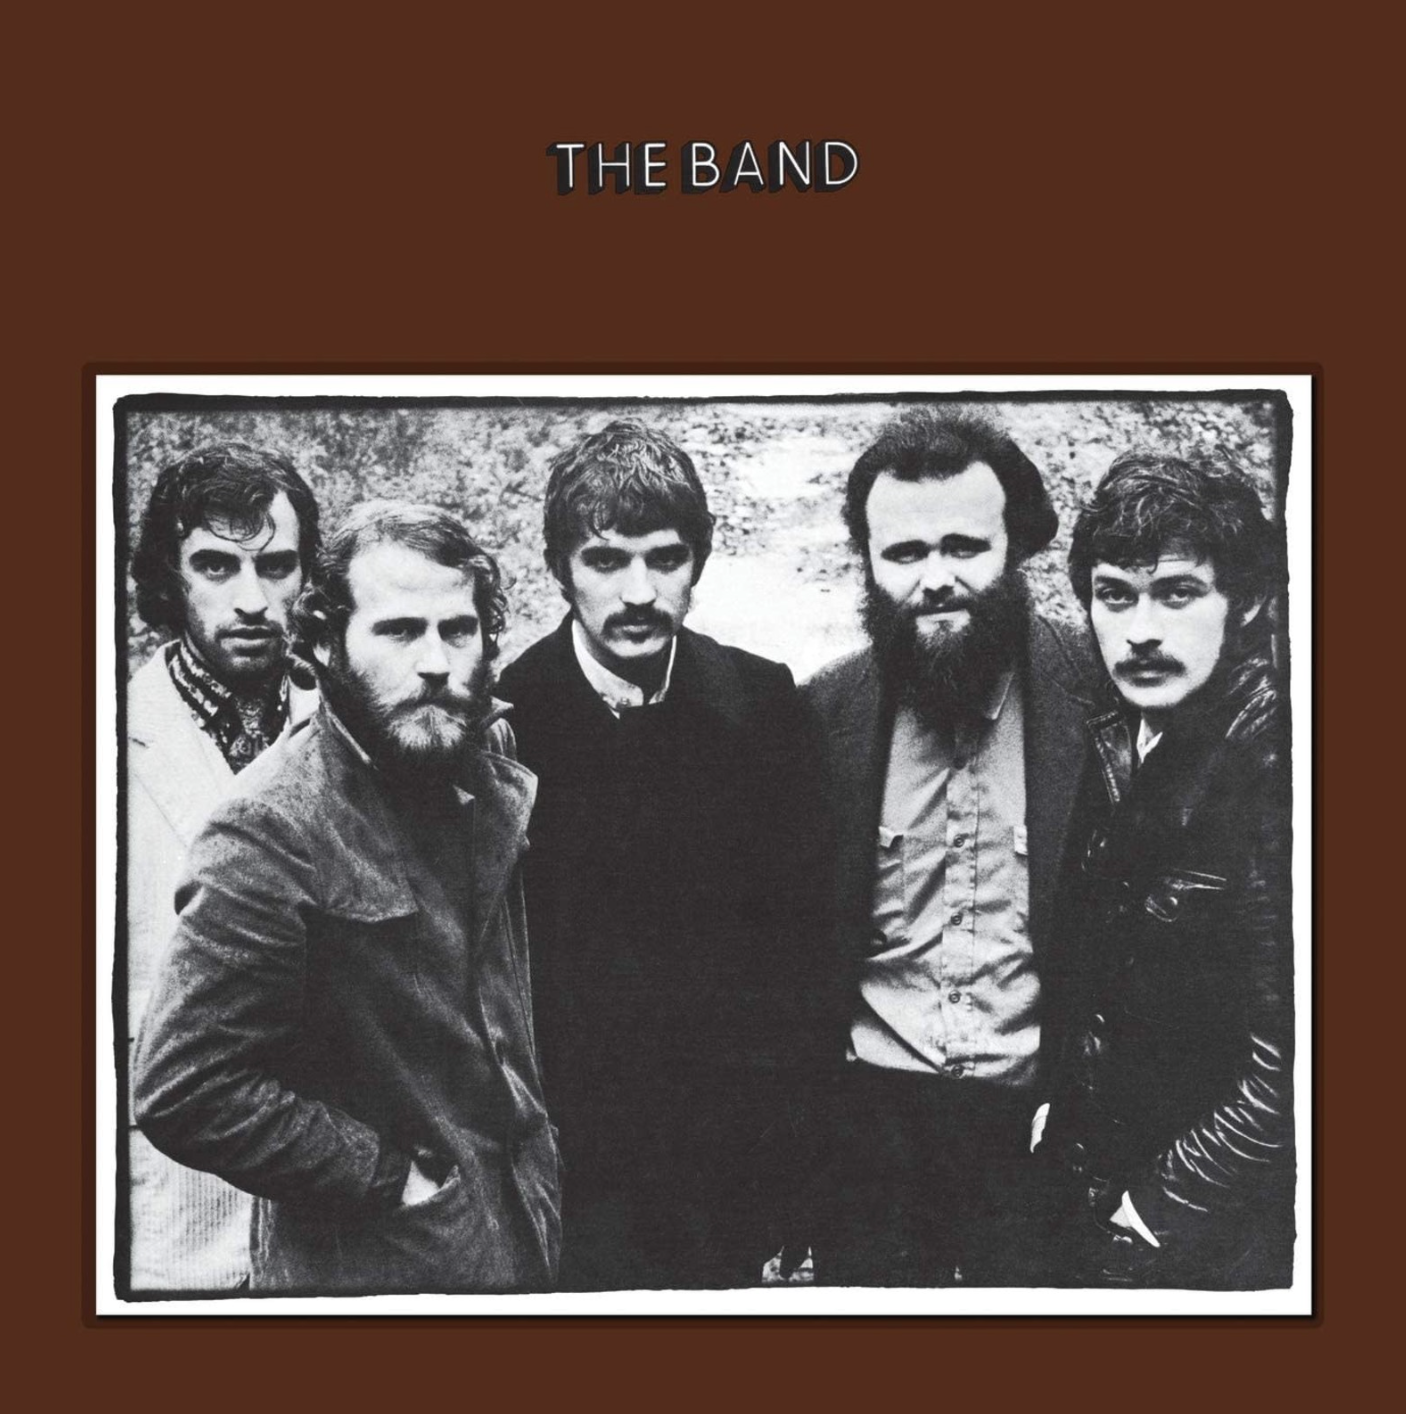 The Band - The Band (50th Anniversary) [Tiger's Eye Vinyl]